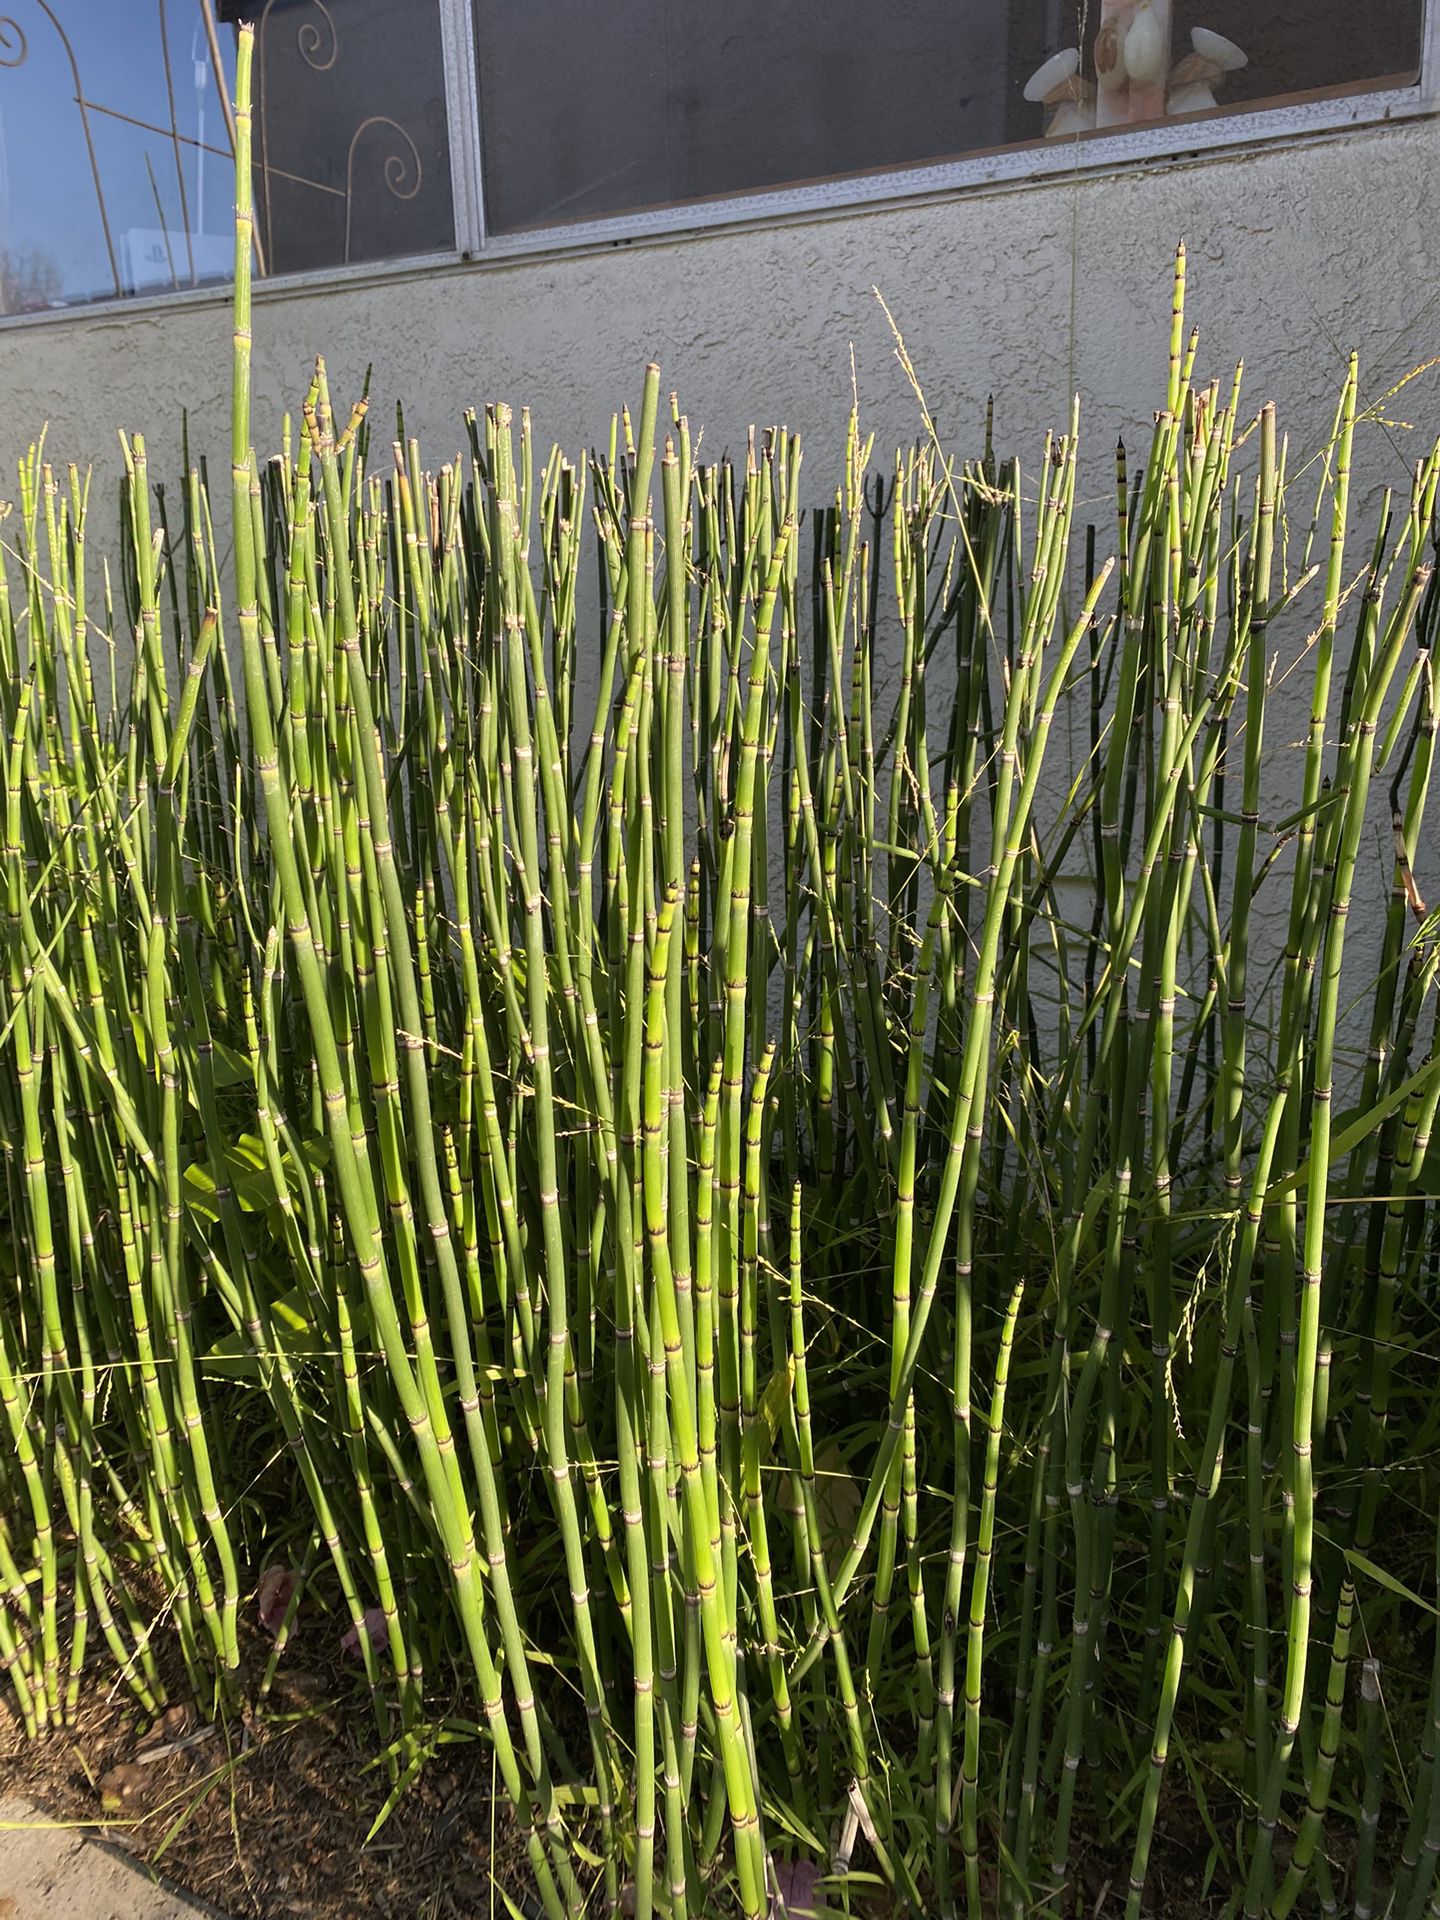 Bundle of 3 x 1 Gallon pots Of horsetail Plant - About 10 reeds each ranging from 12” to 40” tall. Rooted and Ready to be planted.